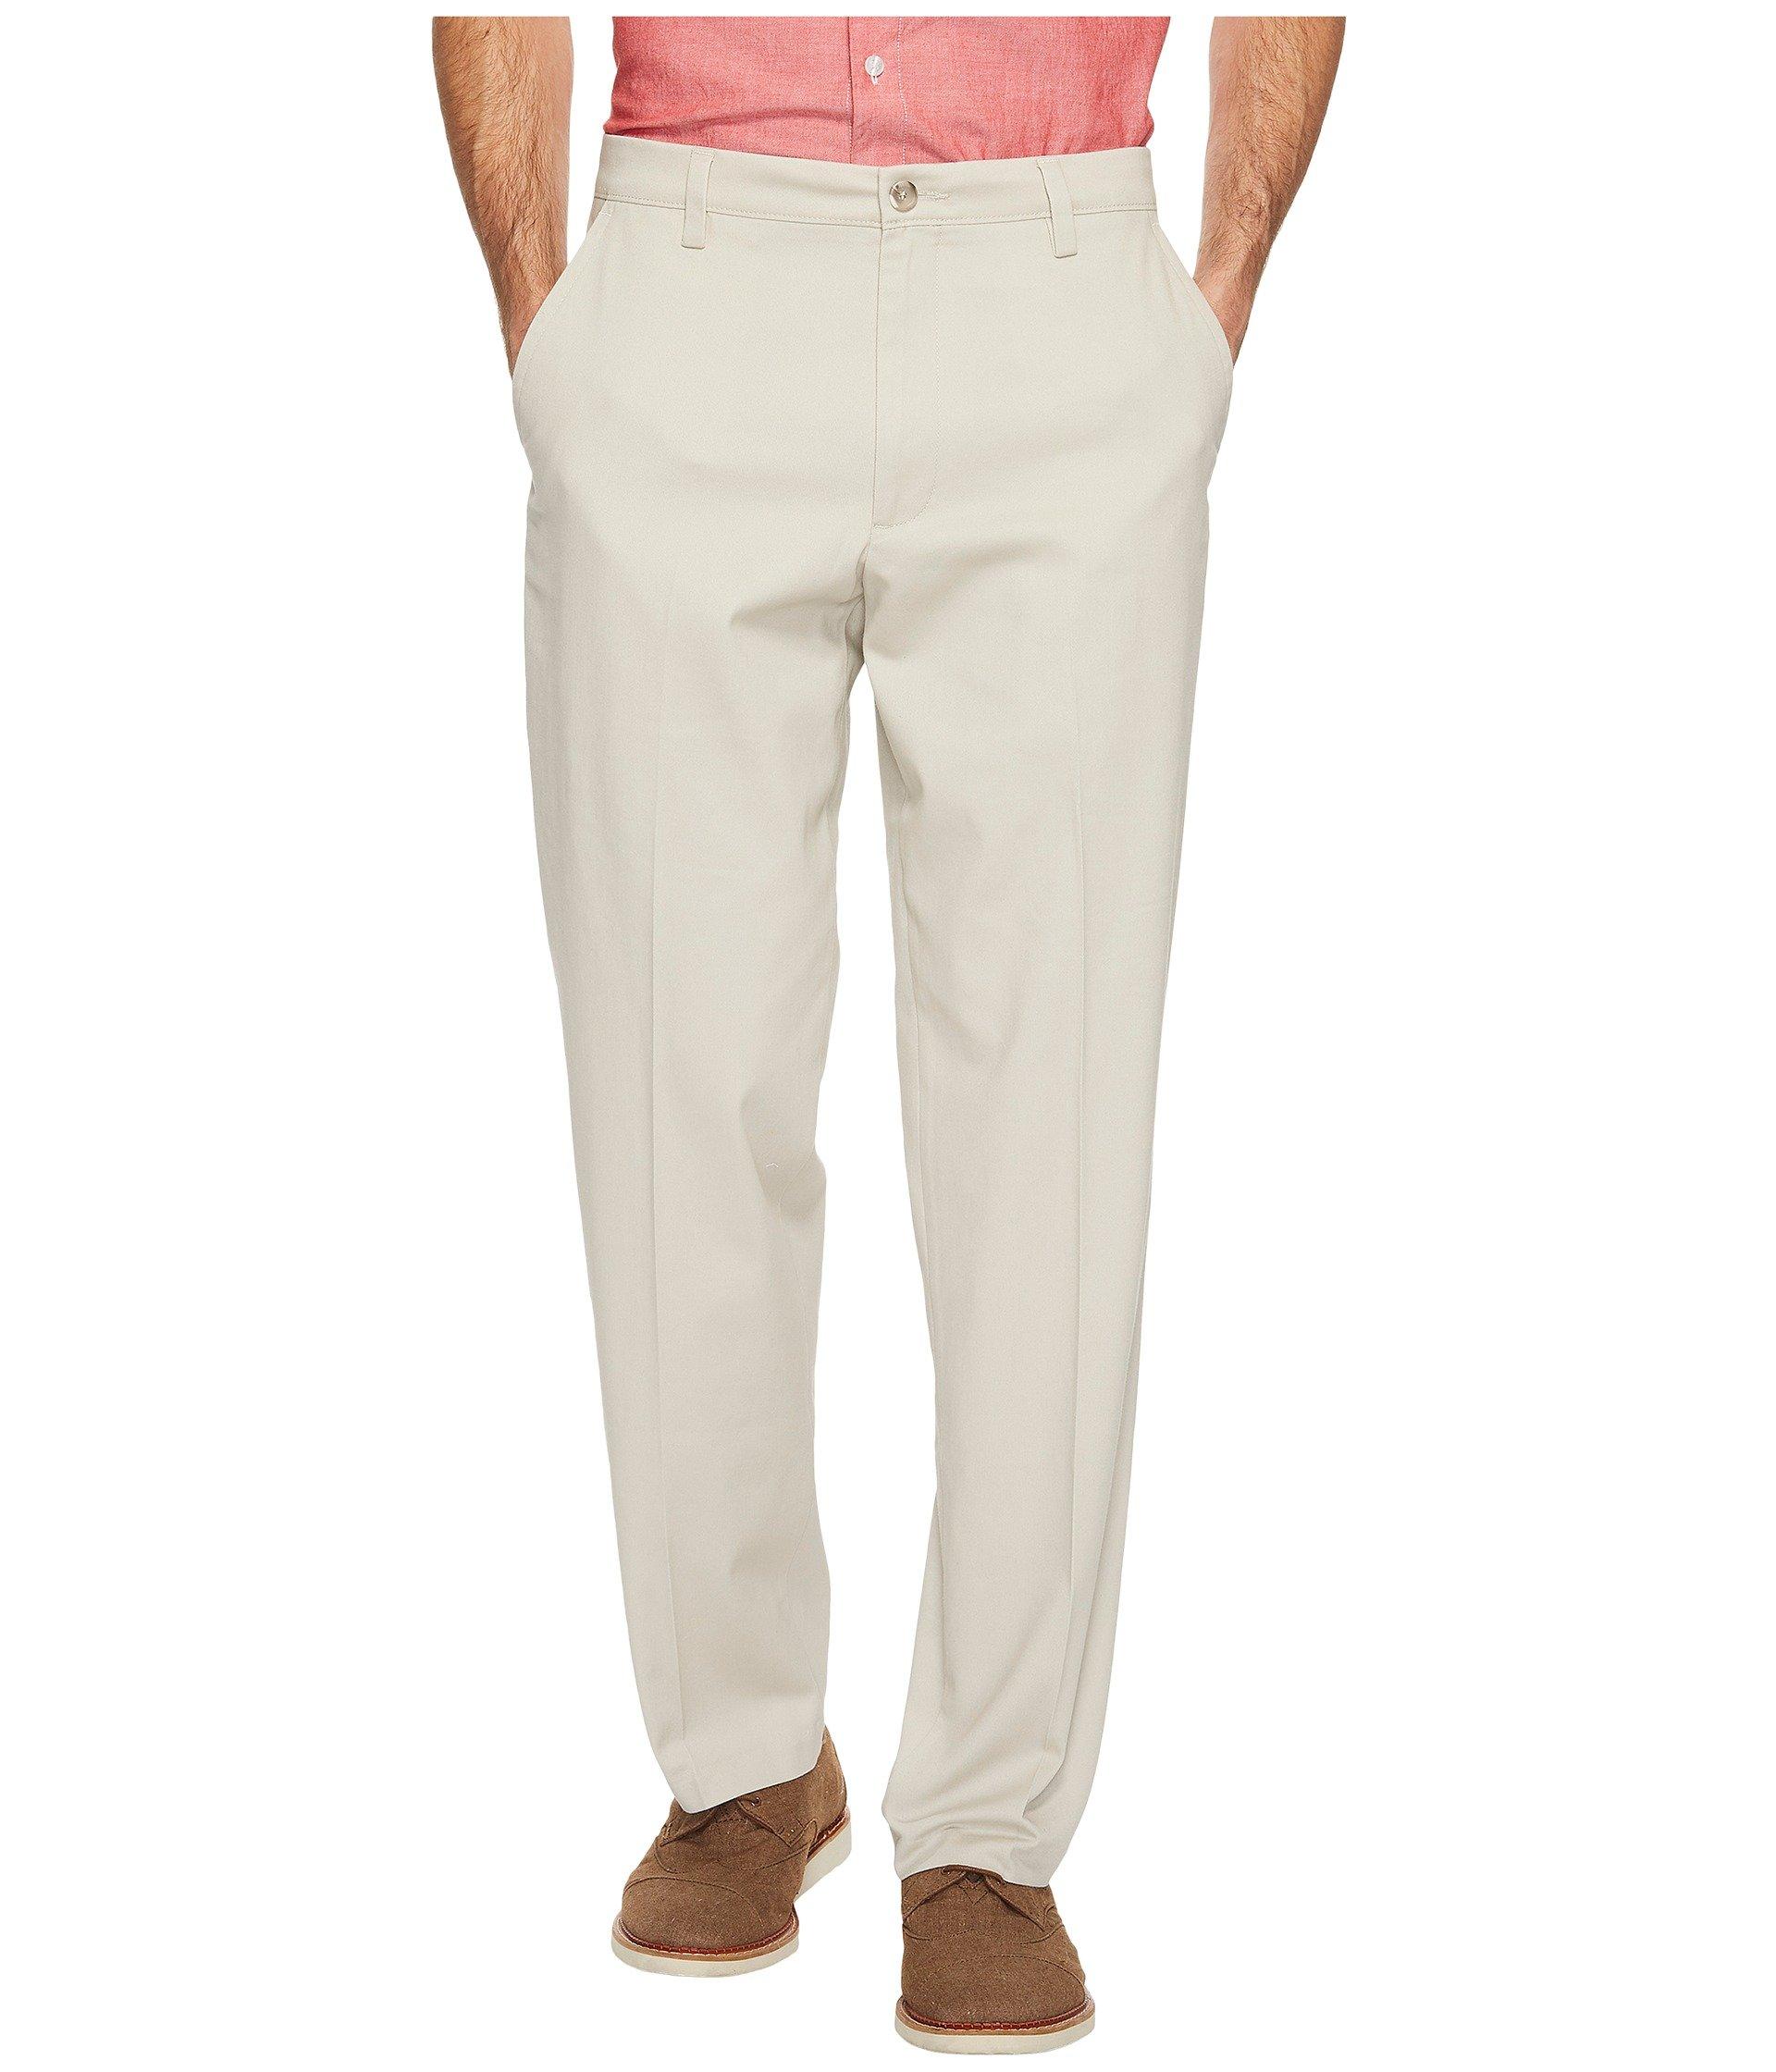 Dockers Cotton Easy Khaki D3 Classic Fit Pants in White for Men - Lyst